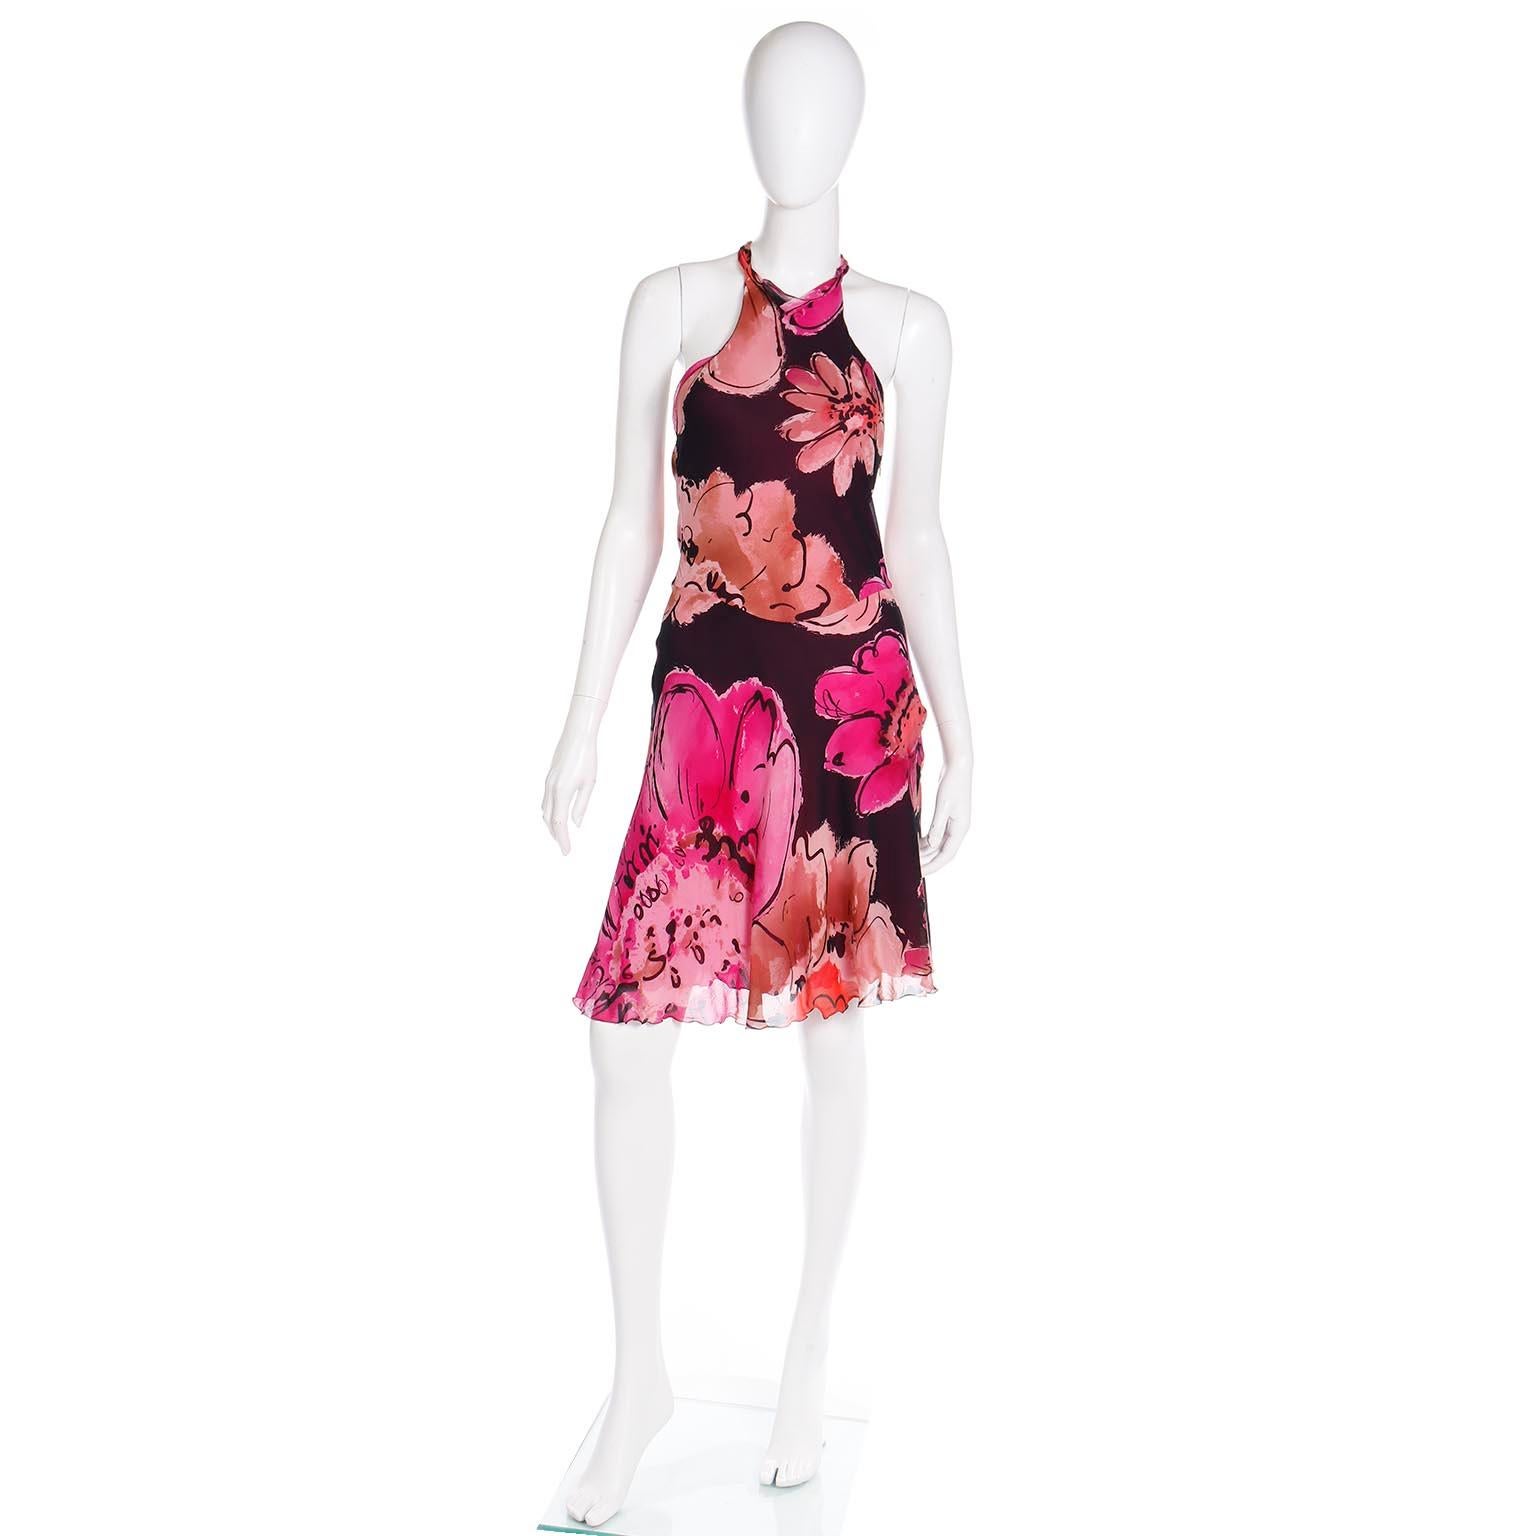 This vintage floral tissue silk Gianni Versace dress was designed by Donatella Versace in the early 2000's, The dress is cut on the bias and has high slit flyaway panels and lettuce edging. The fabric is a luxe sheer black silk crepe with bold pink